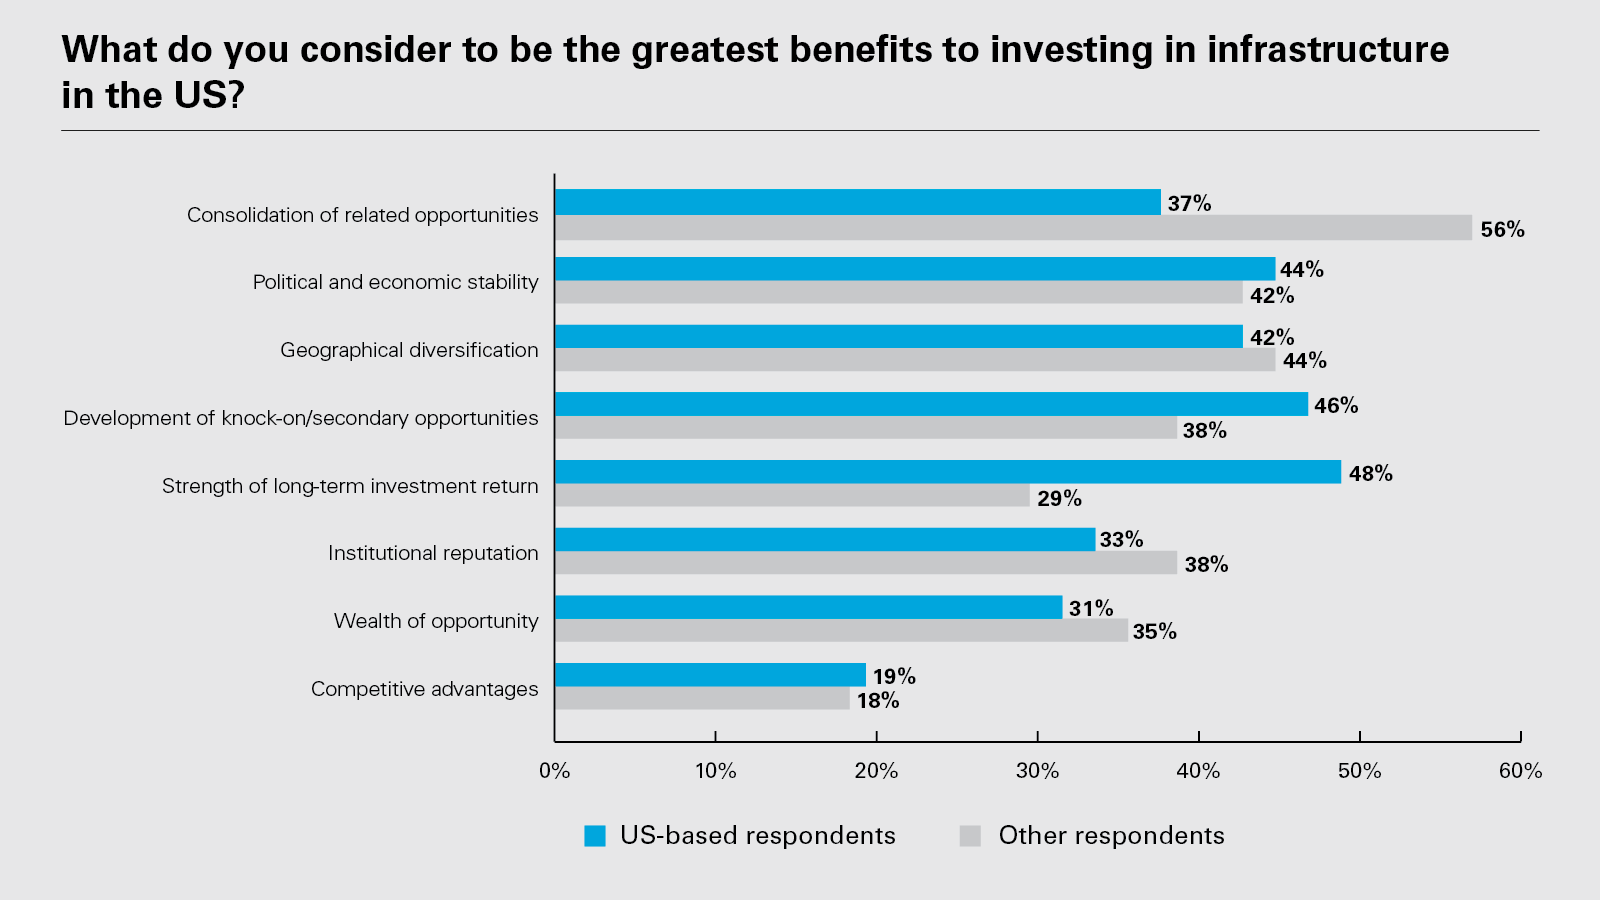 What do you consider to be the greatest benefits to investing in infrastructure in the US?